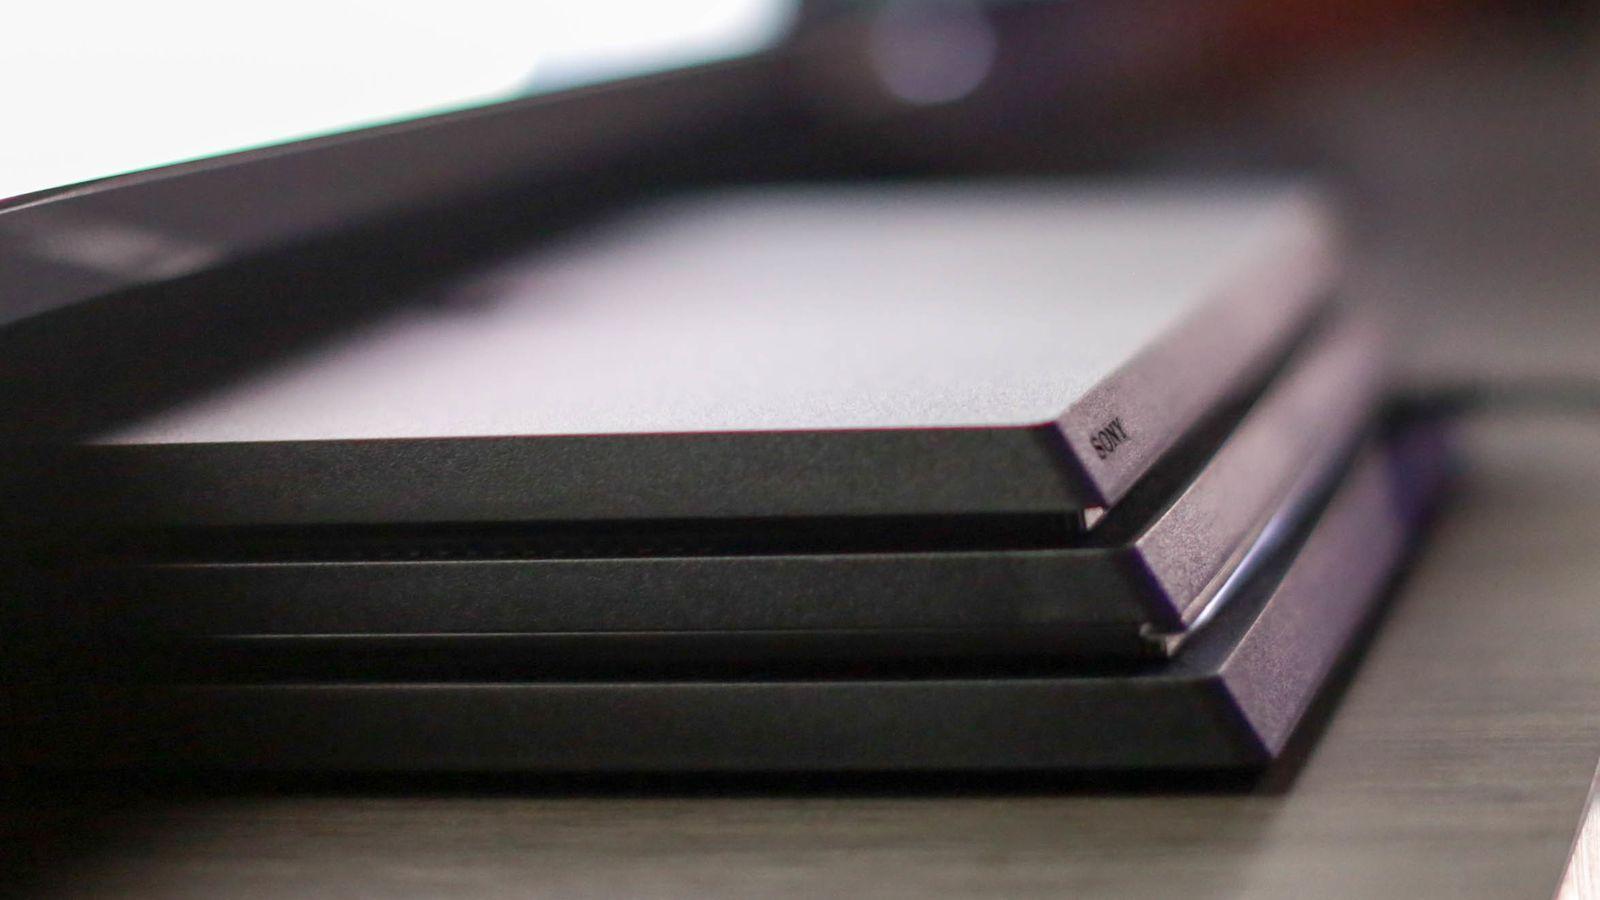 Here is what's in PS4's newest system update 5.0